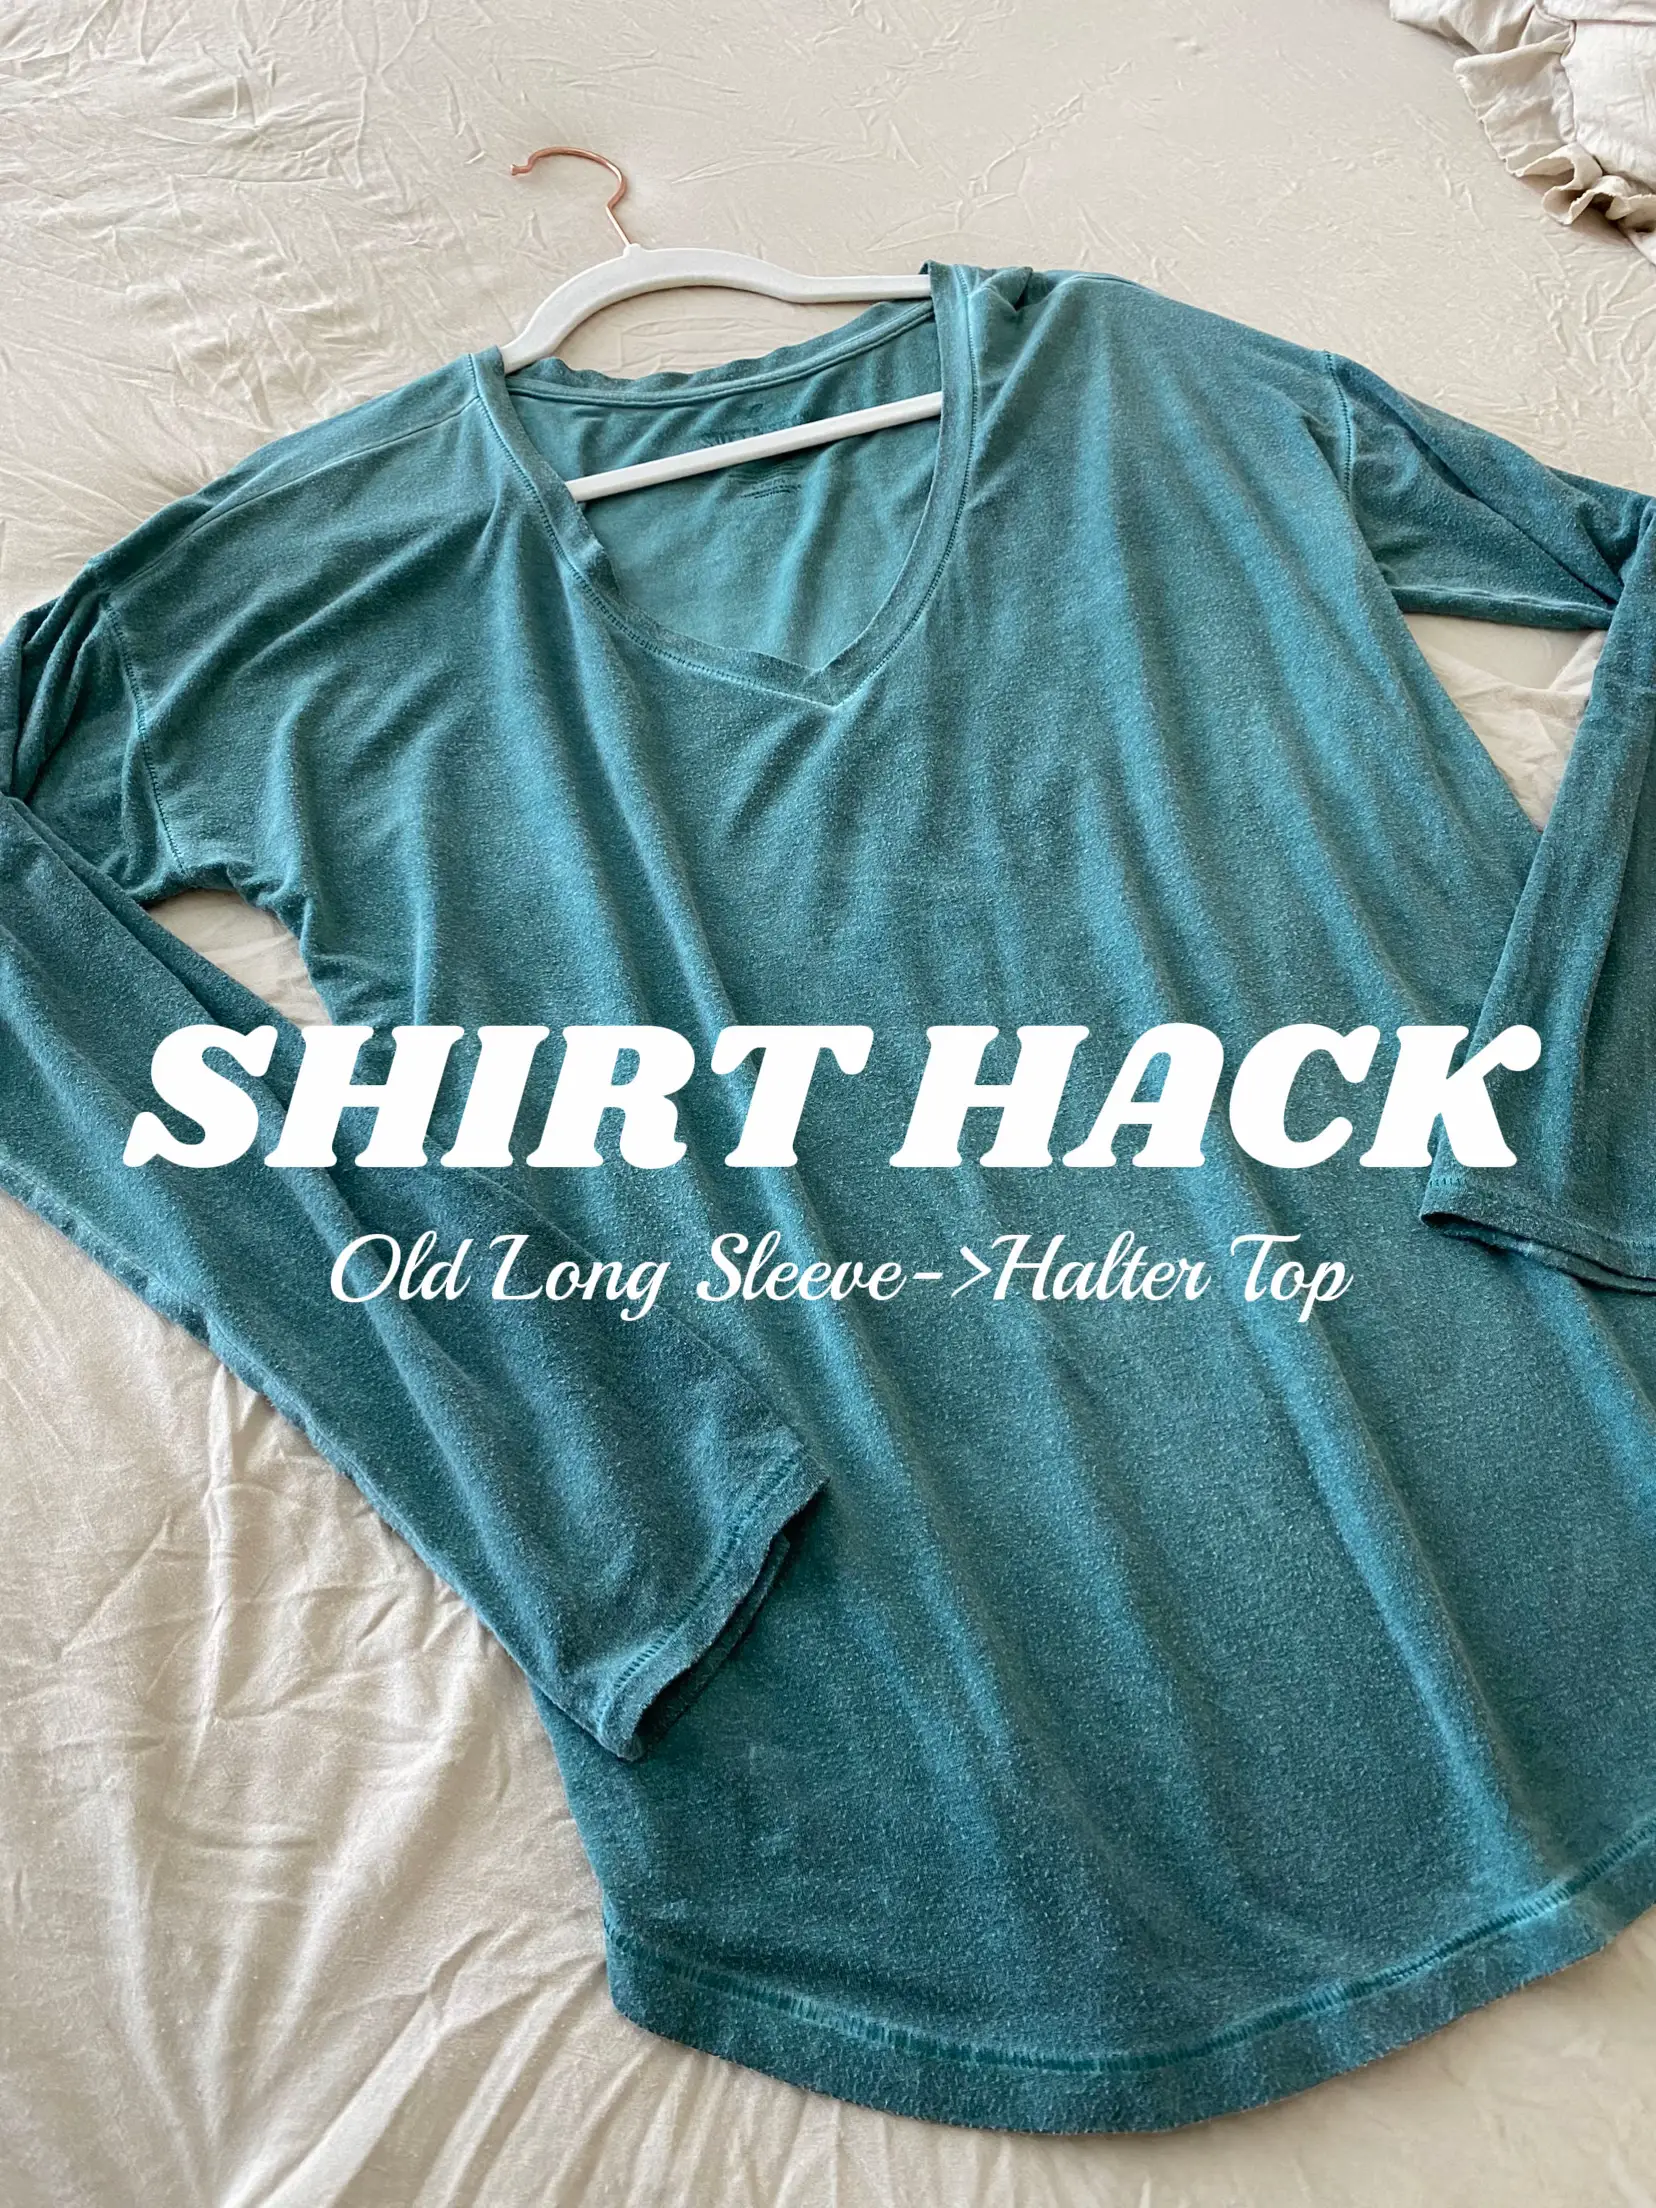 DIY backless top! A way to #thriftflip those old tank tops and give it